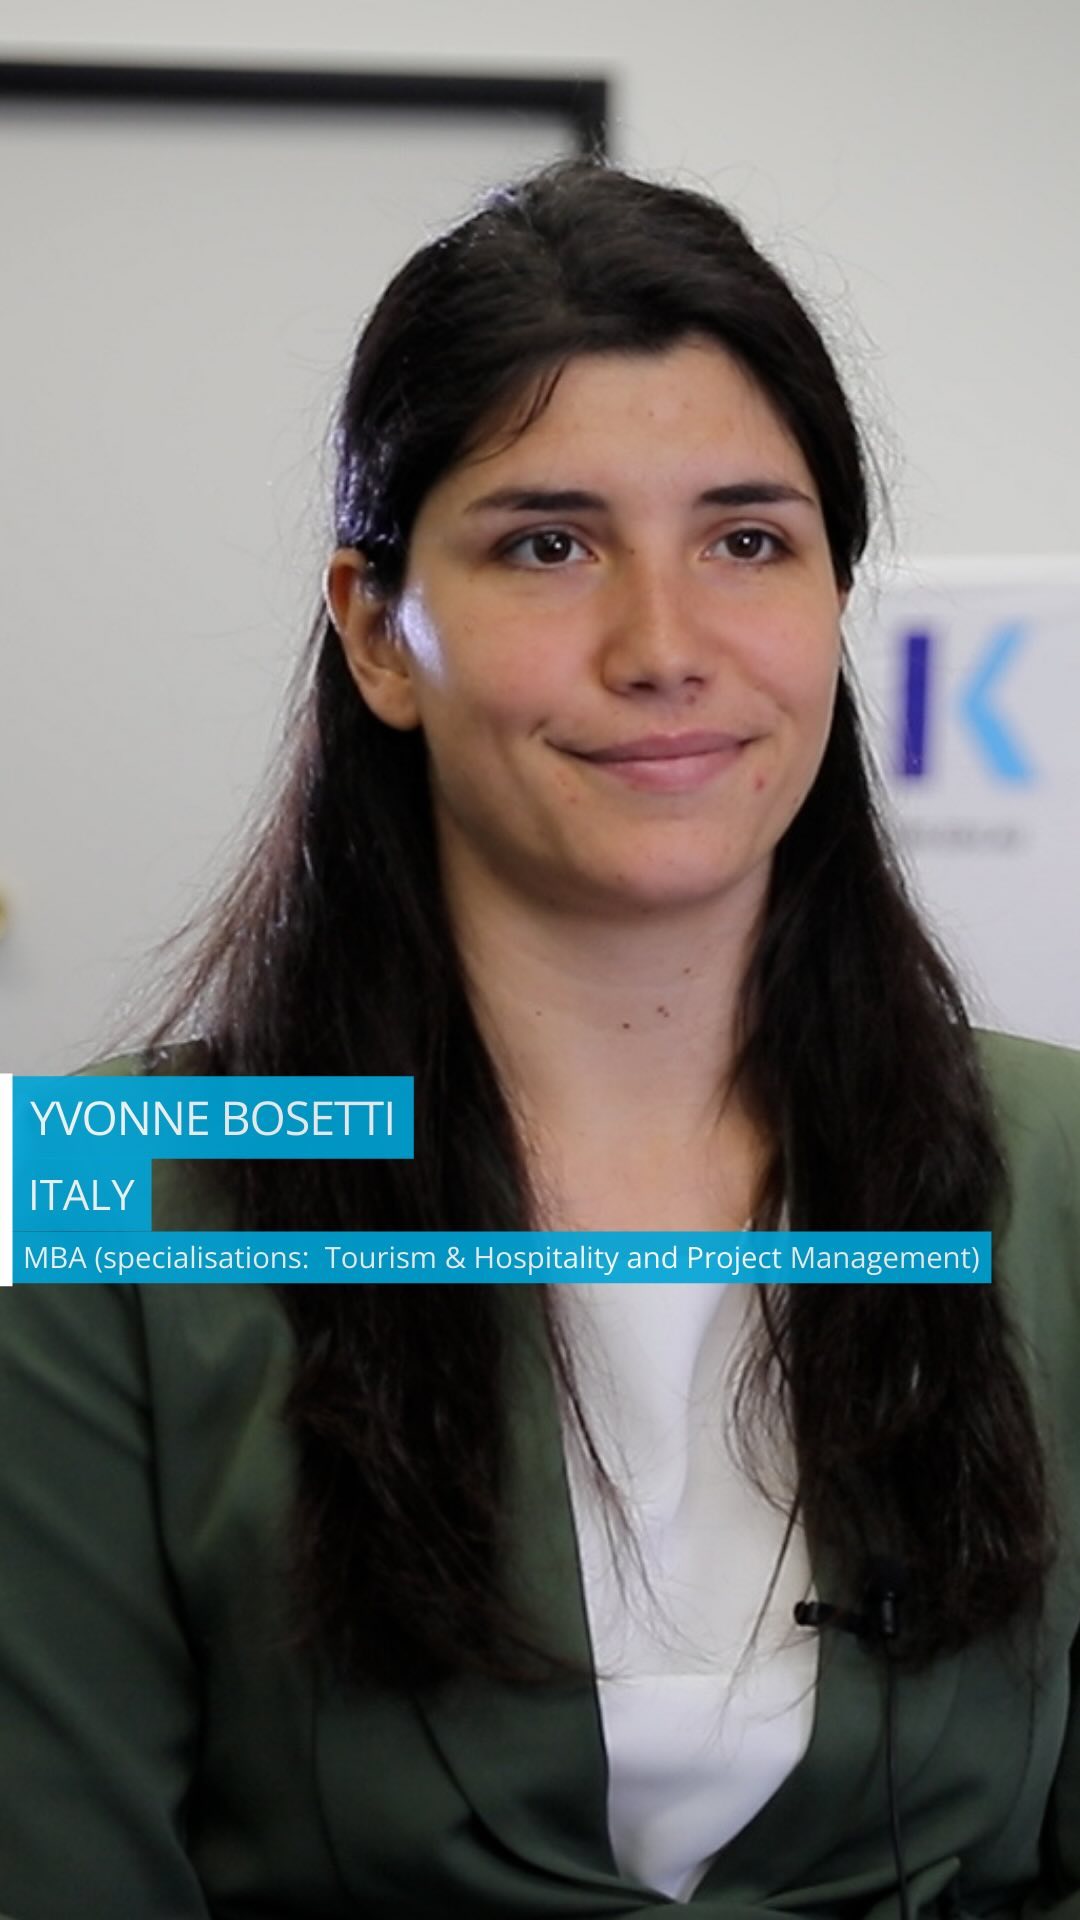 Watch Yvonne’s video to learn how she landed a full-time job and hear her advice to aspiring hospitality and tourism professionals. ✨🏨
#studykbs #careeropportunities #studentstories